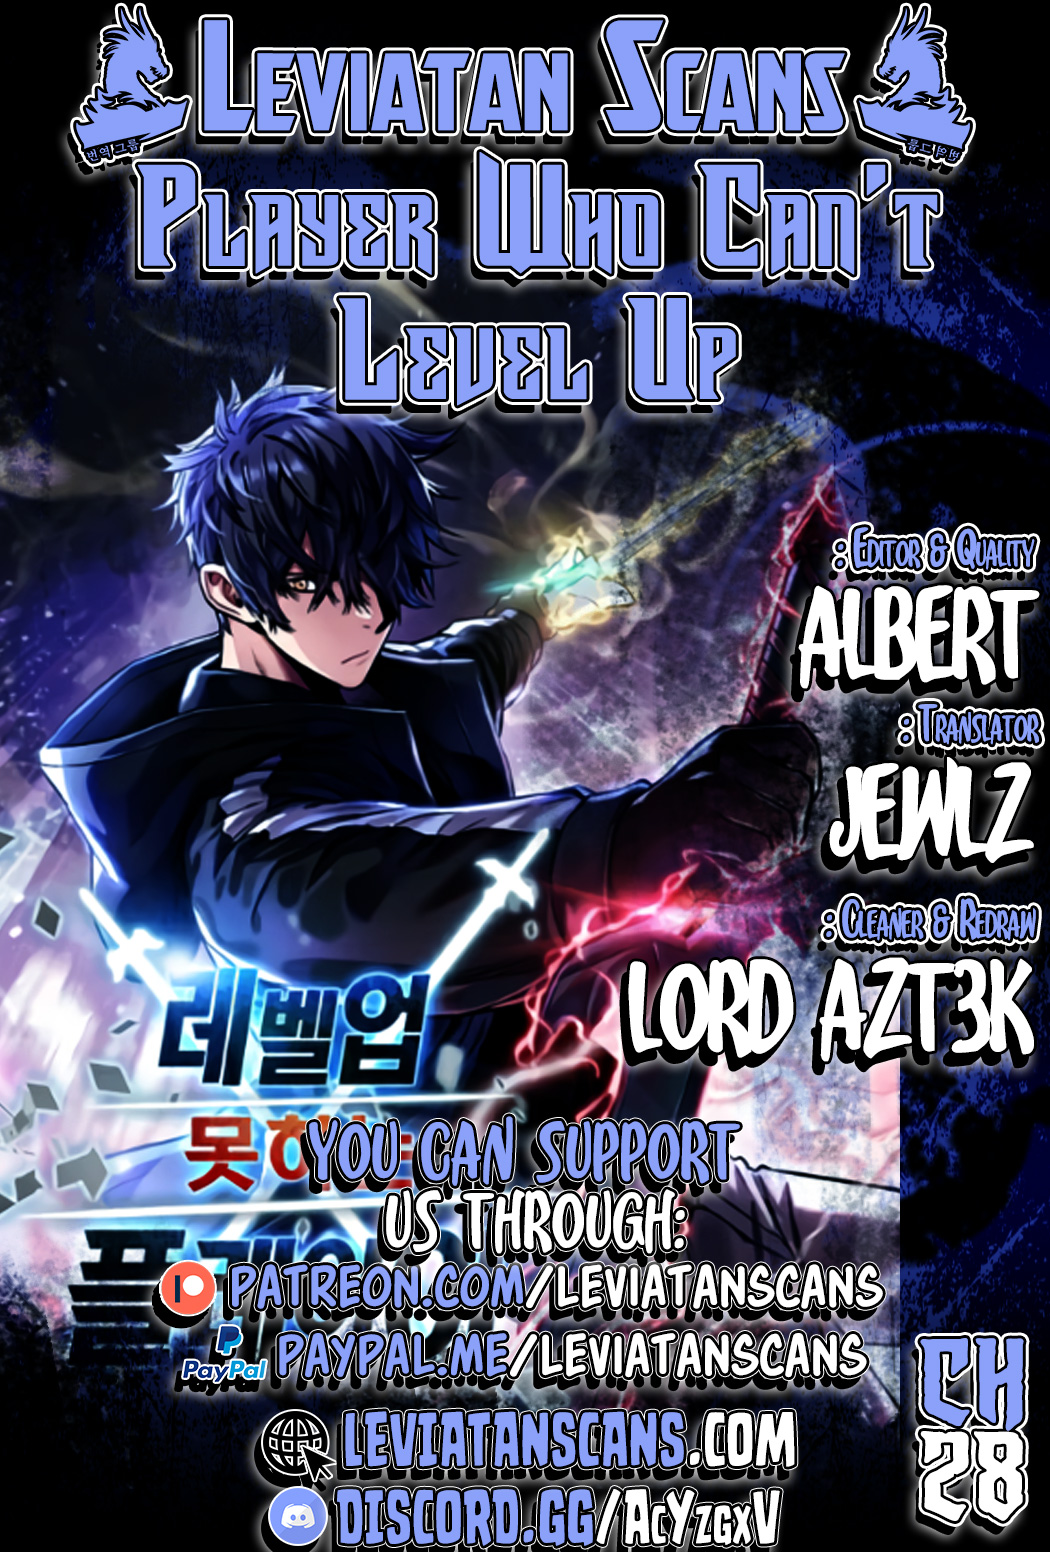 The Player That Can't Level Up - Chapter 2556 - Image 1